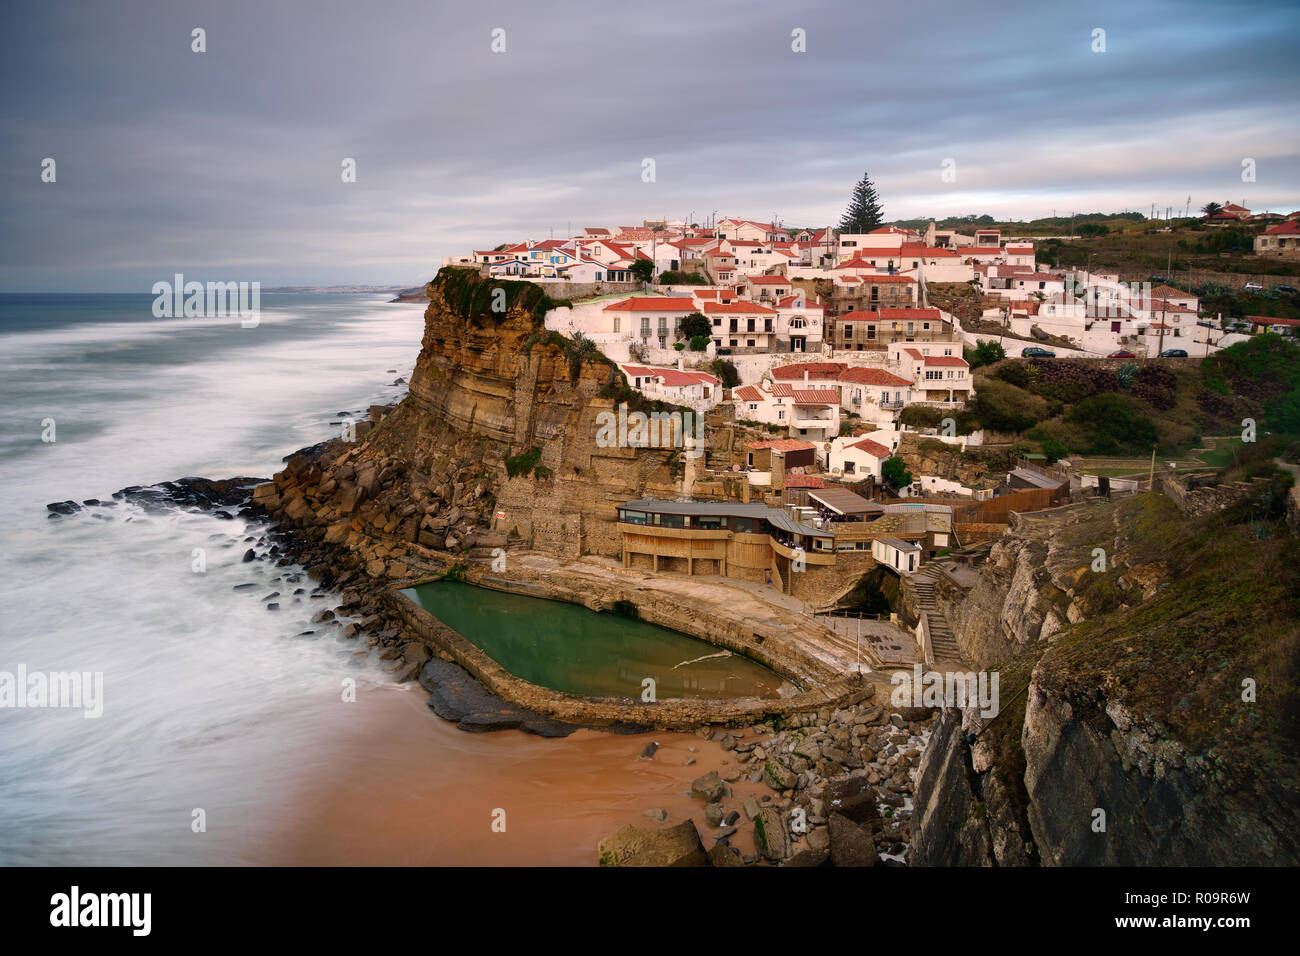 View of the Picturesque village Azenhas do Mar, on the edge of a cliff with a beach below. Landmark near Sintra, Lisbon, Portugal, Europe. landscape. Stock Photo